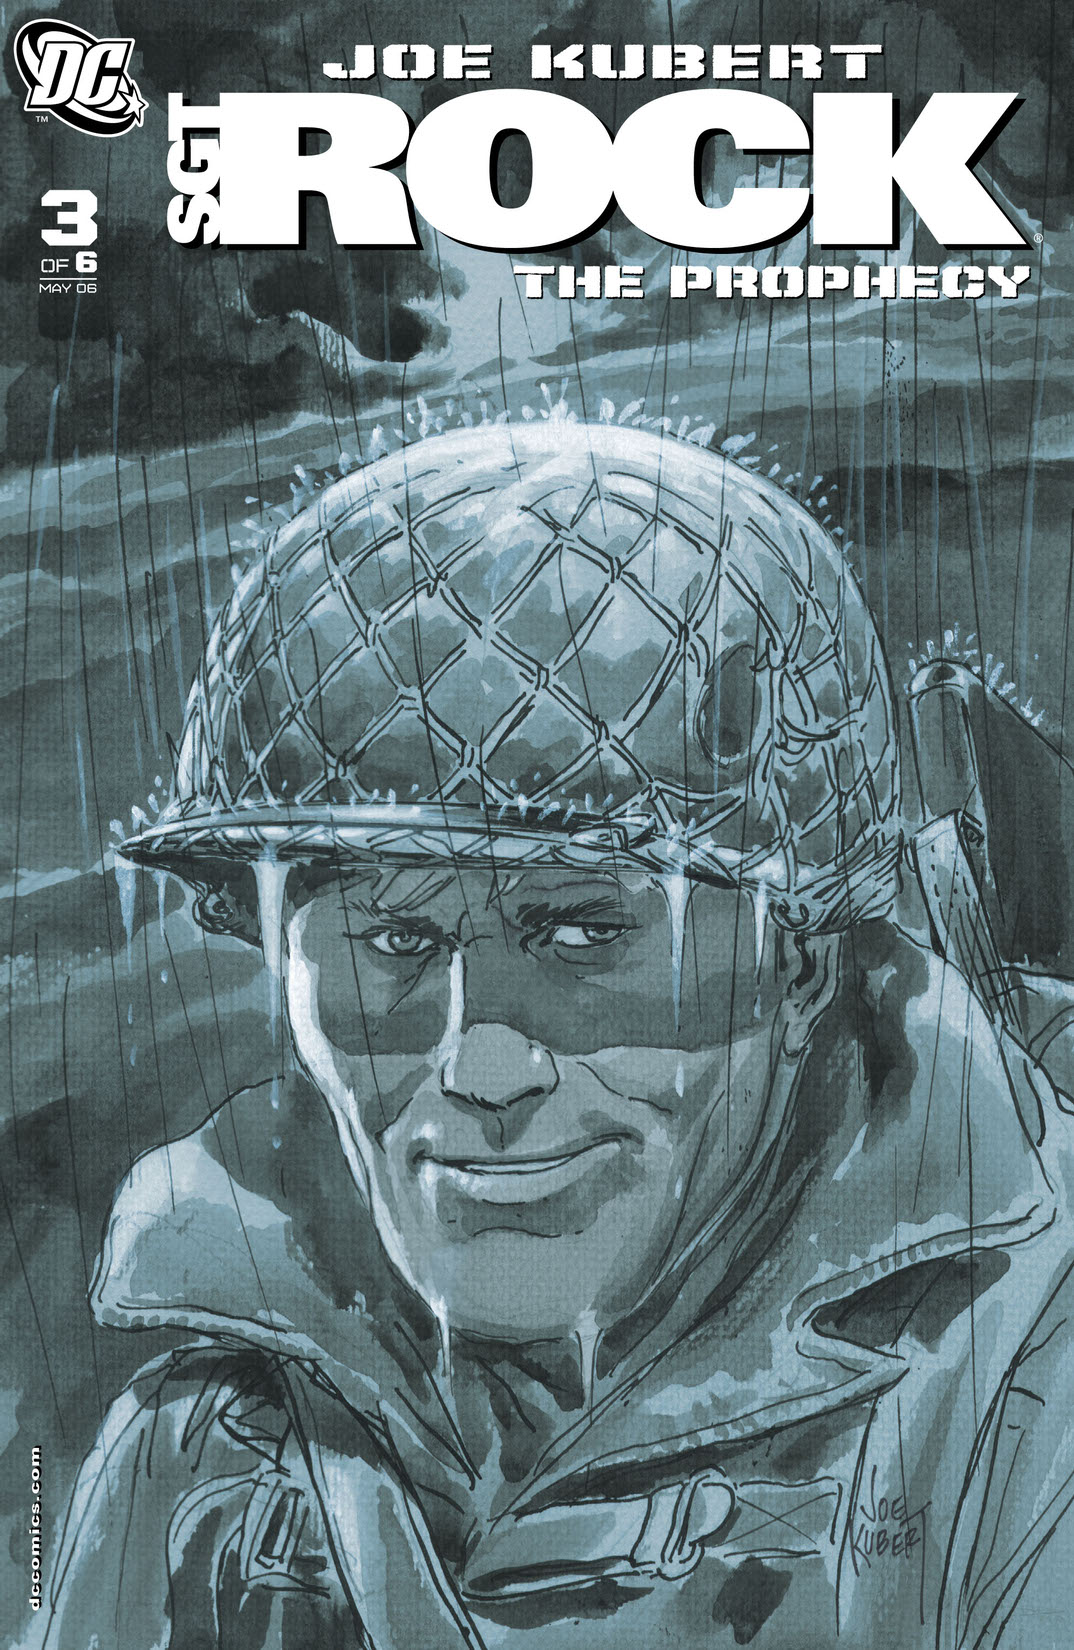 Sgt. Rock: The Prophecy #3 preview images